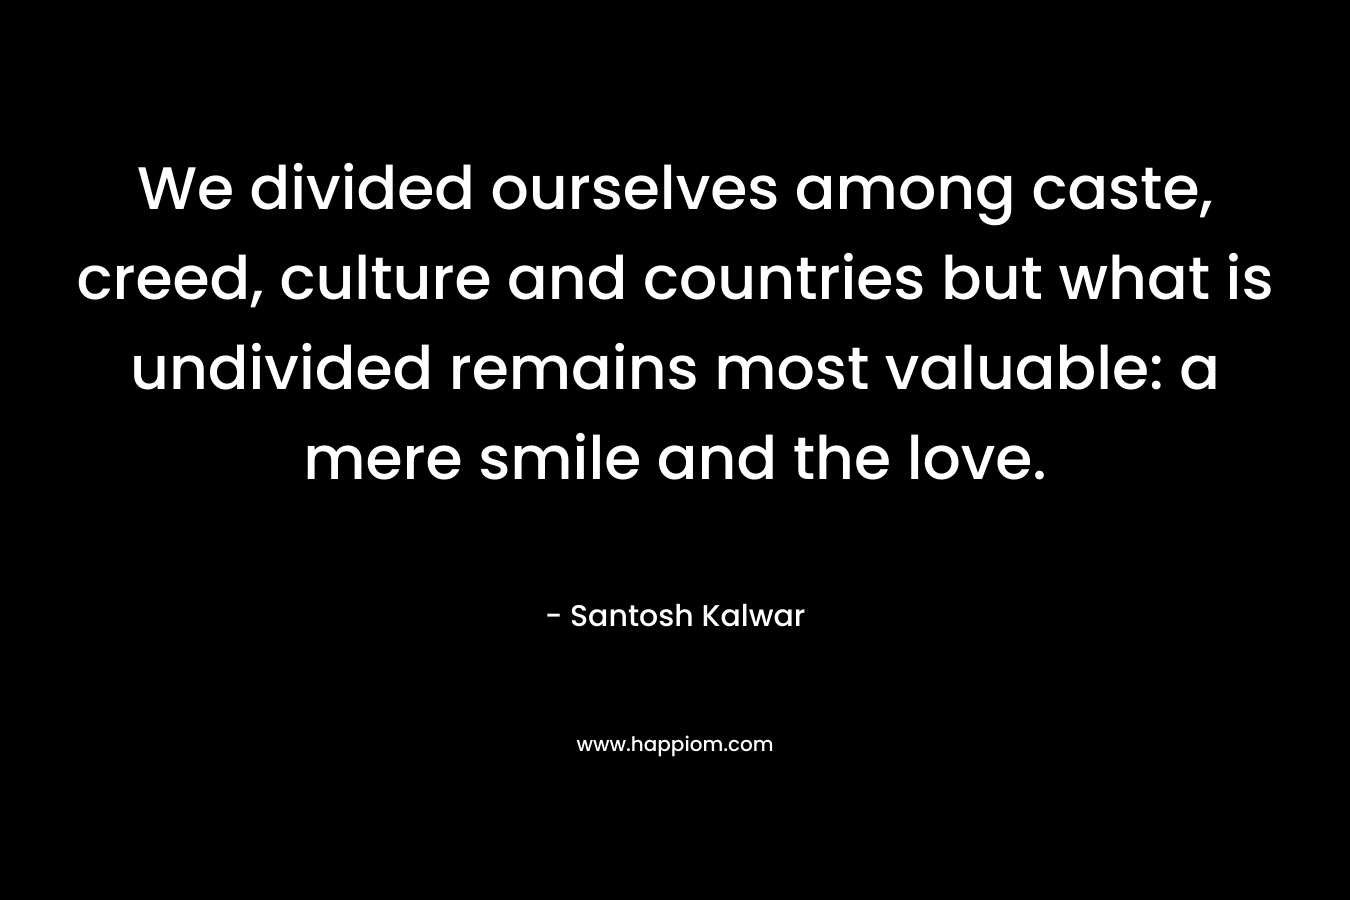 We divided ourselves among caste, creed, culture and countries but what is undivided remains most valuable: a mere smile and the love. – Santosh Kalwar